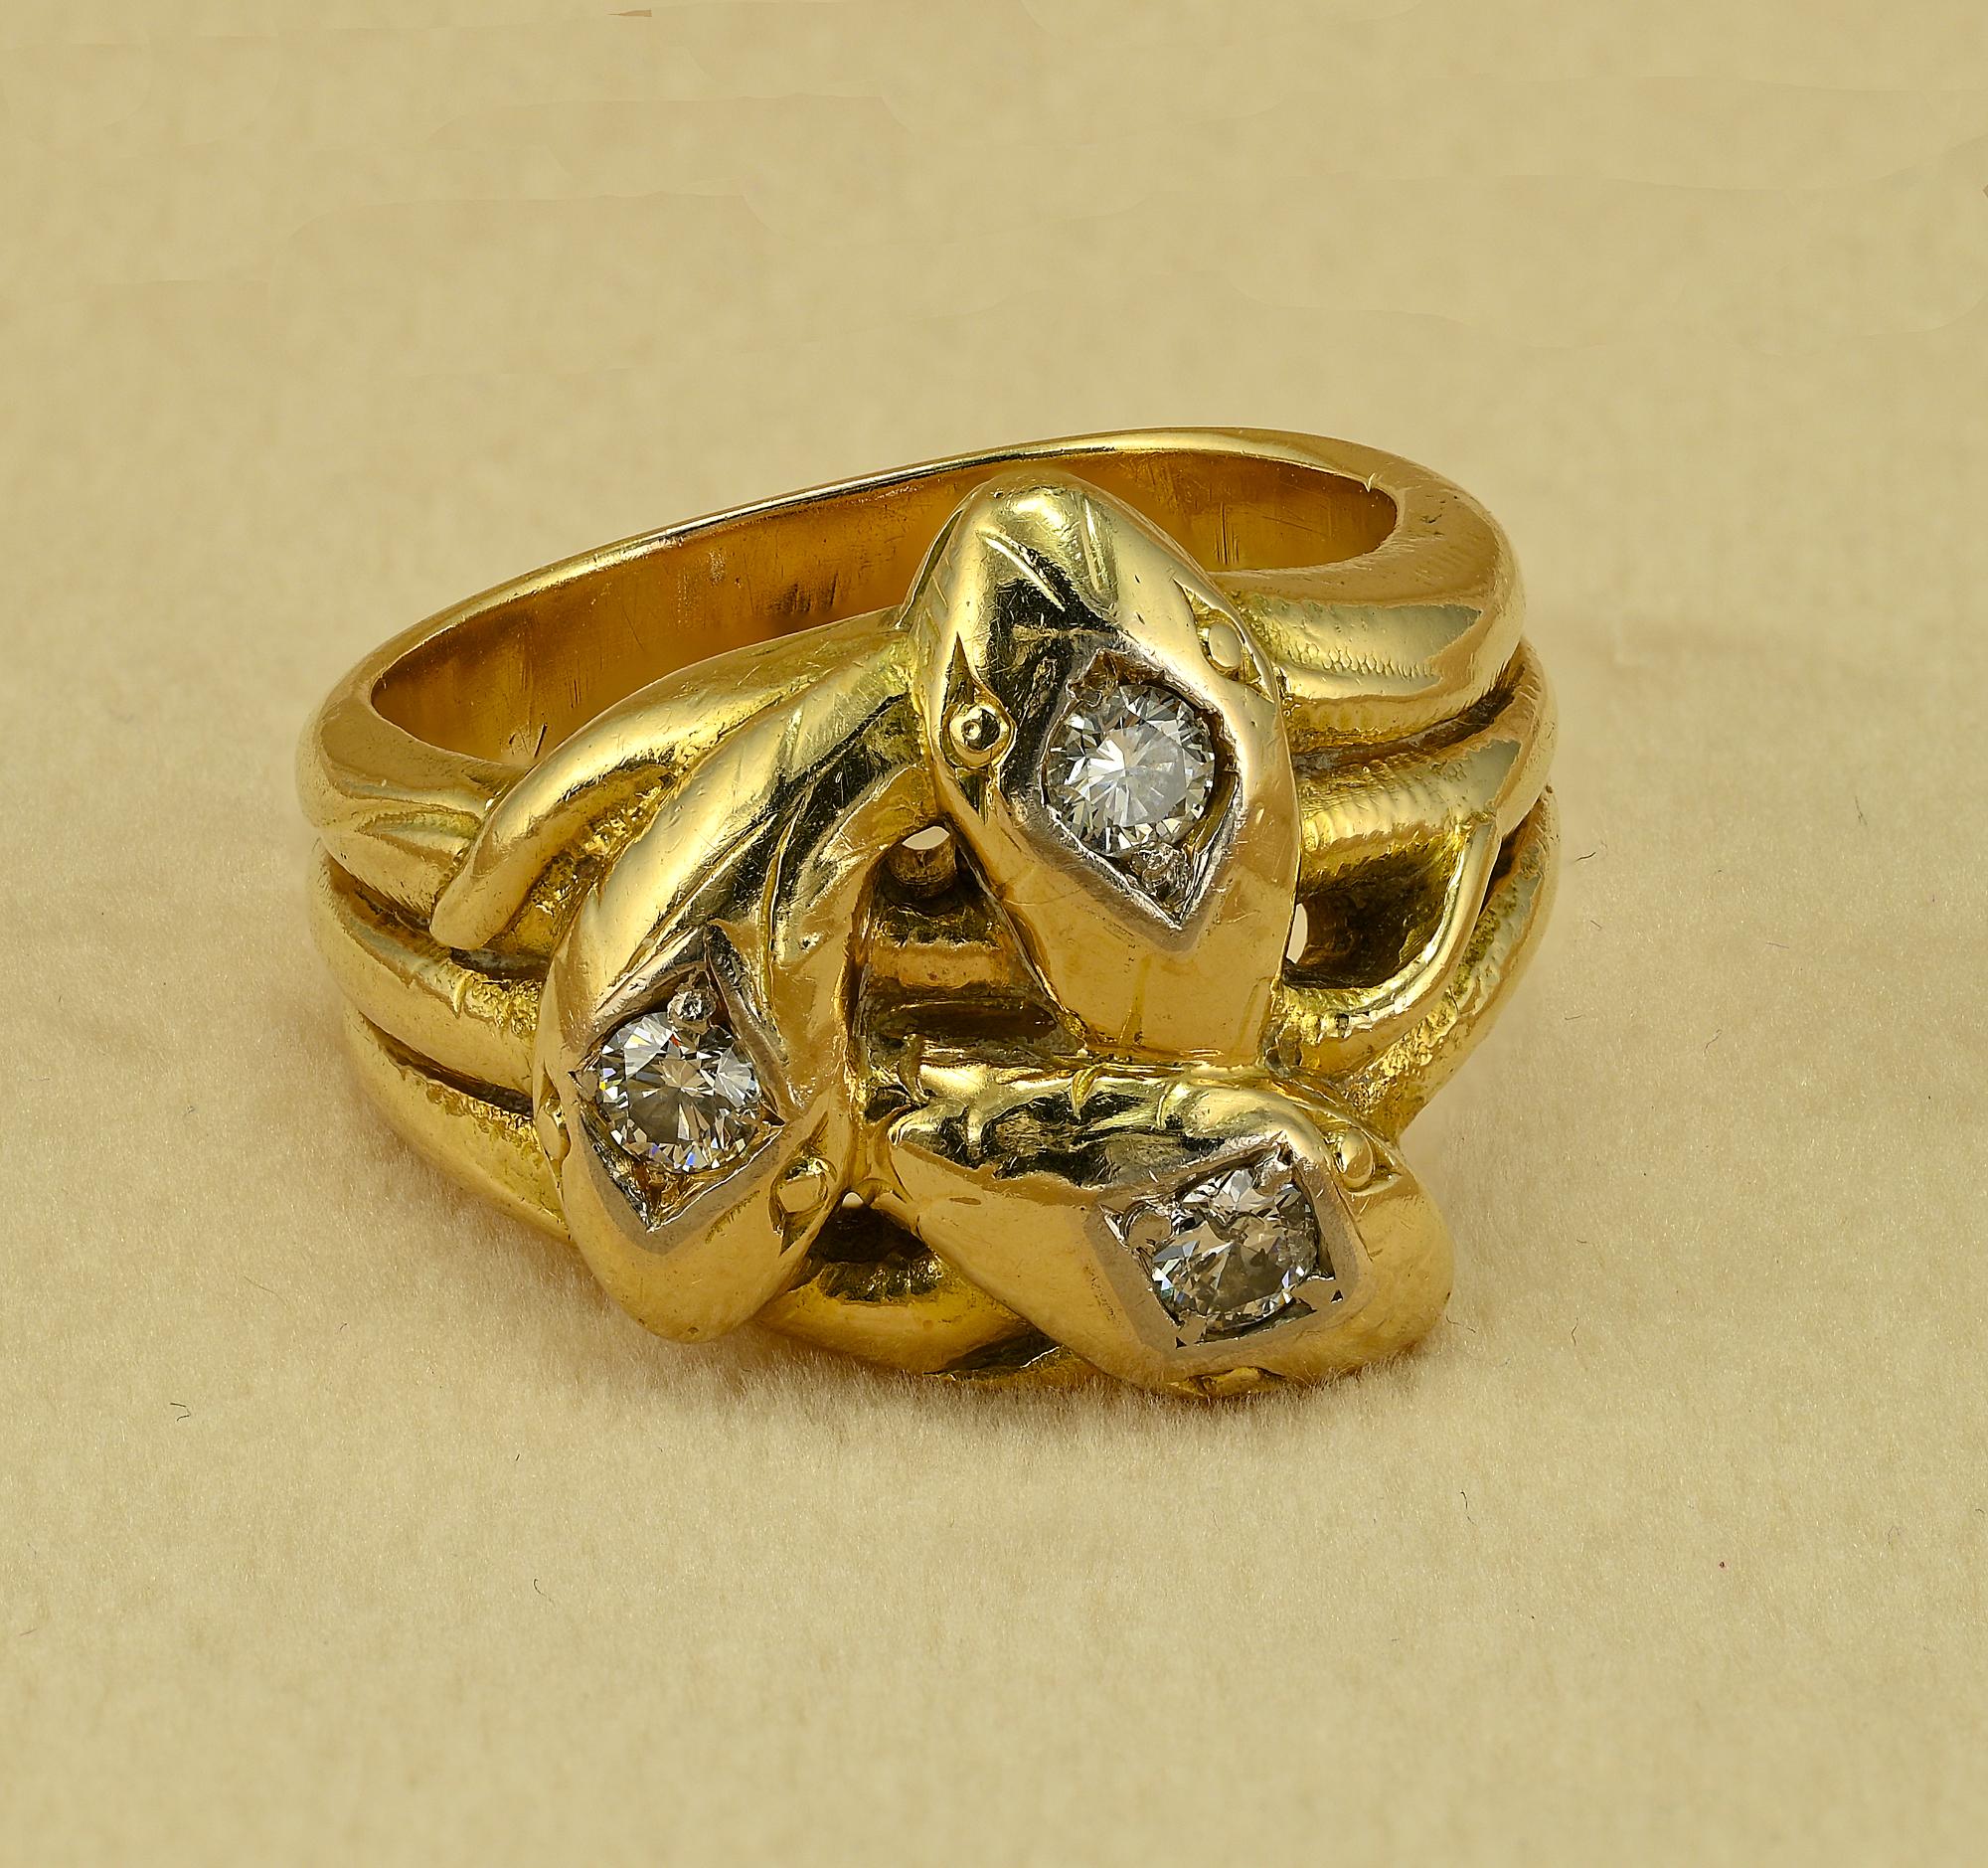 This superb antique snake ring is 1915 circa
Hand crafted of solid 14 Kt gold internally stamped with European 585 standing for 14 KT
Marvelous design with triple interlaced snake heads Diamond set
Approx .45 Ct of total Diamond content assessed G/H